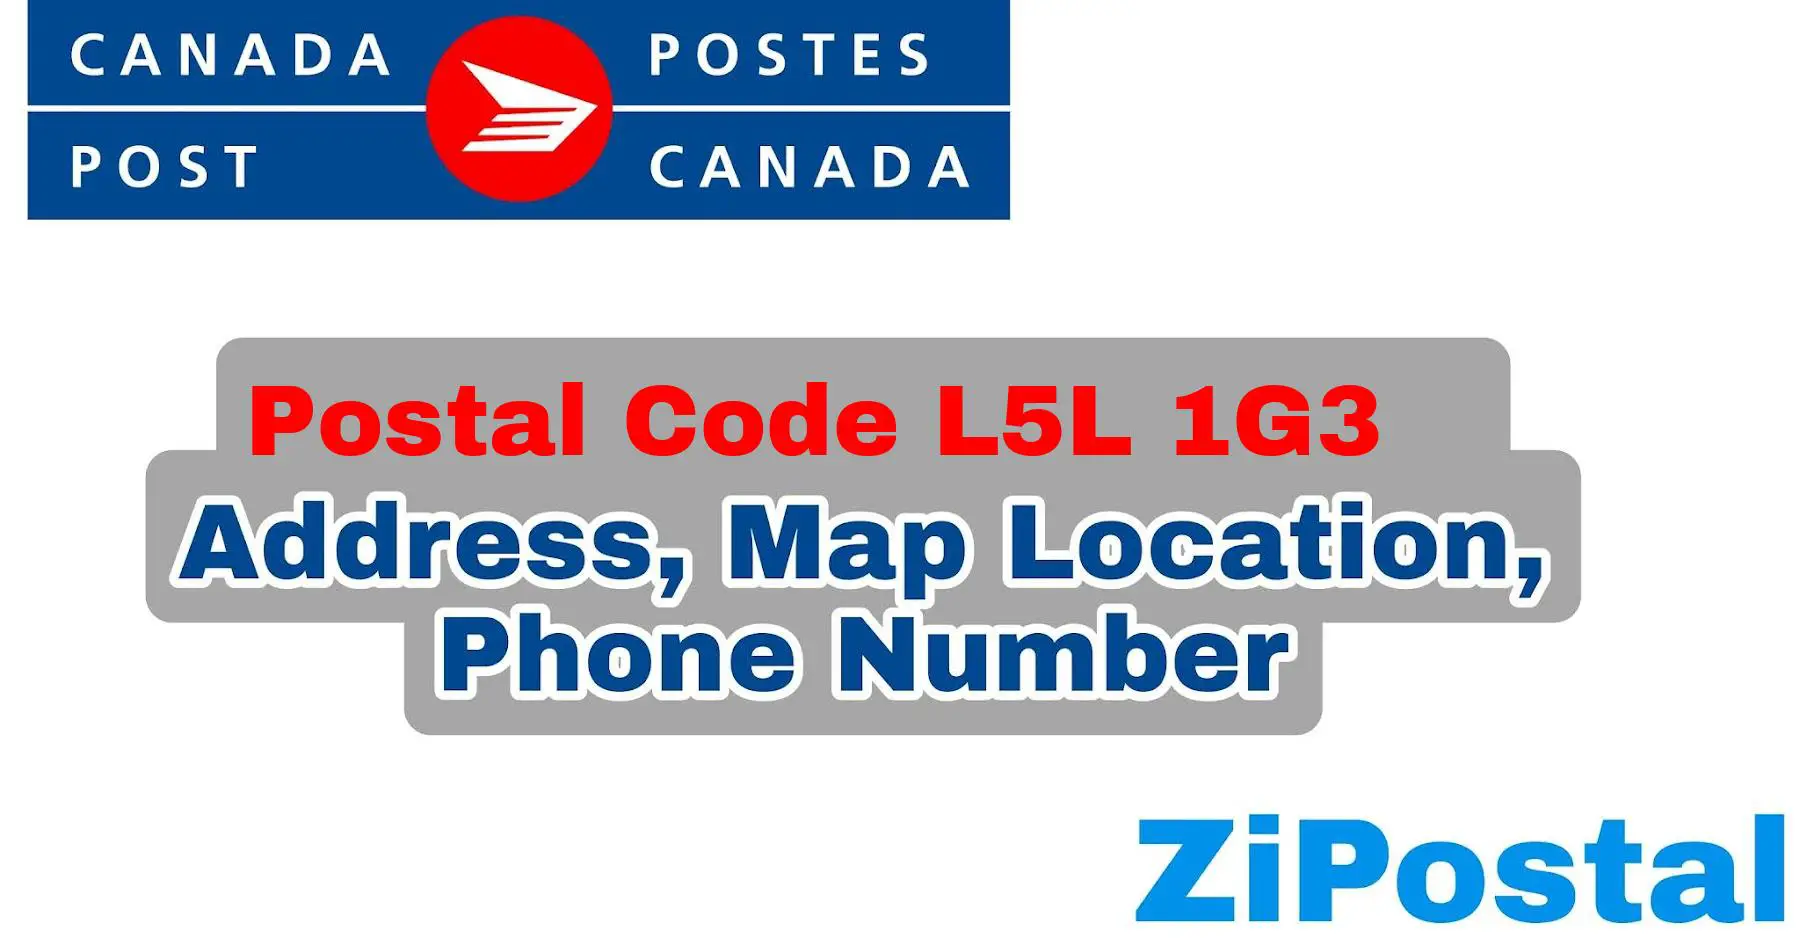 Postal Code L5L 1G3 Address Map Location and Phone Number